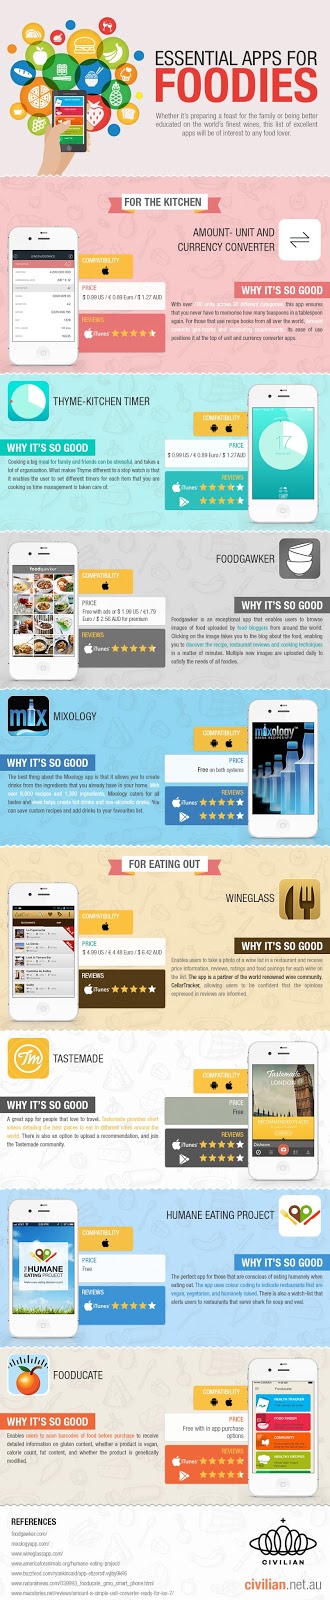 http://infographicjournal.com/wp-content/uploads/2015/07/A-Infographic-on-Essential-Apps-for-Foodies1.jpg